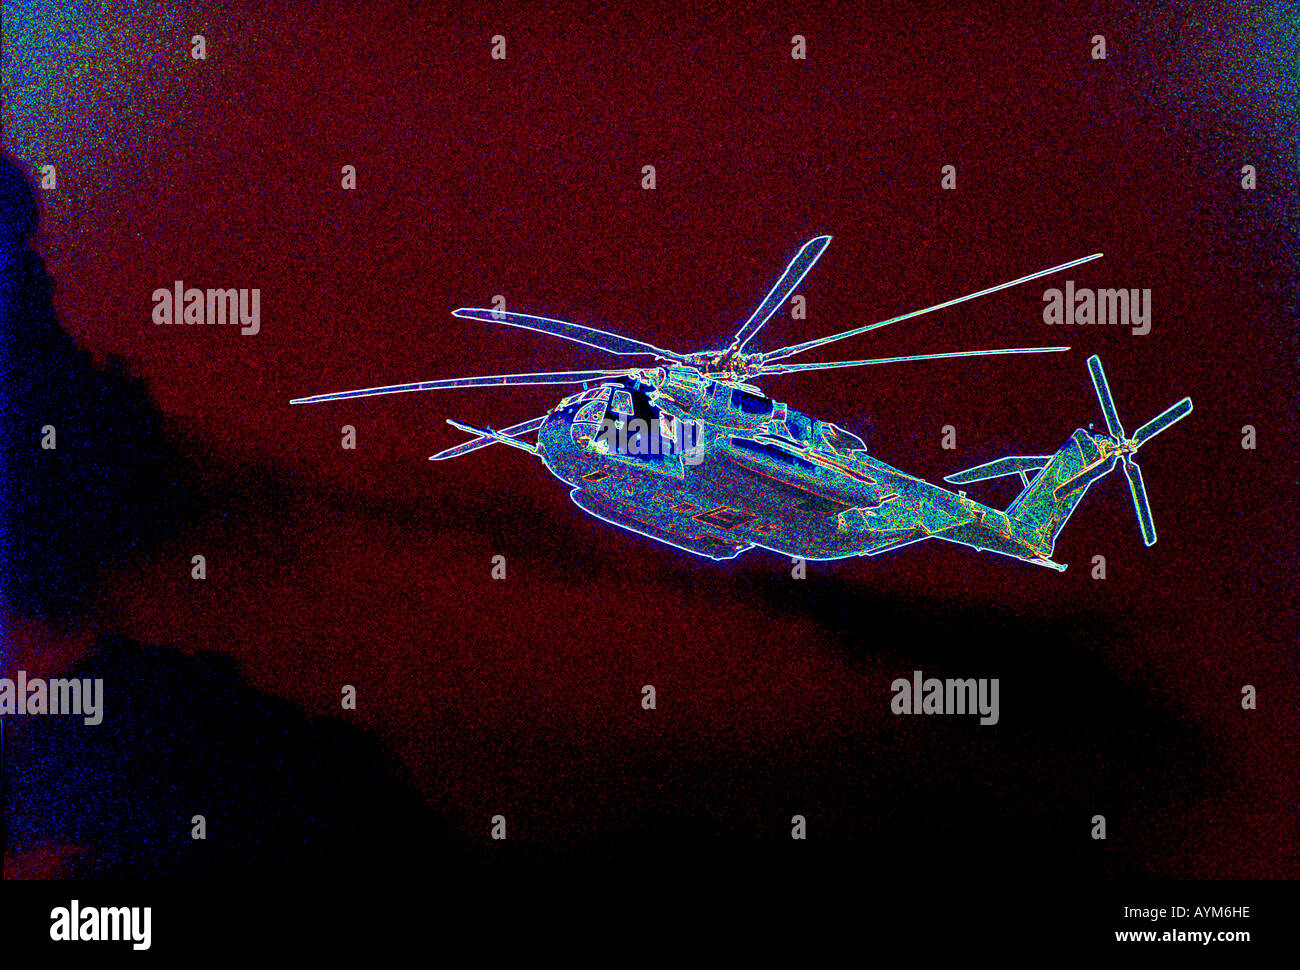 Sikorsky S-65 military helicopter Stock Photo